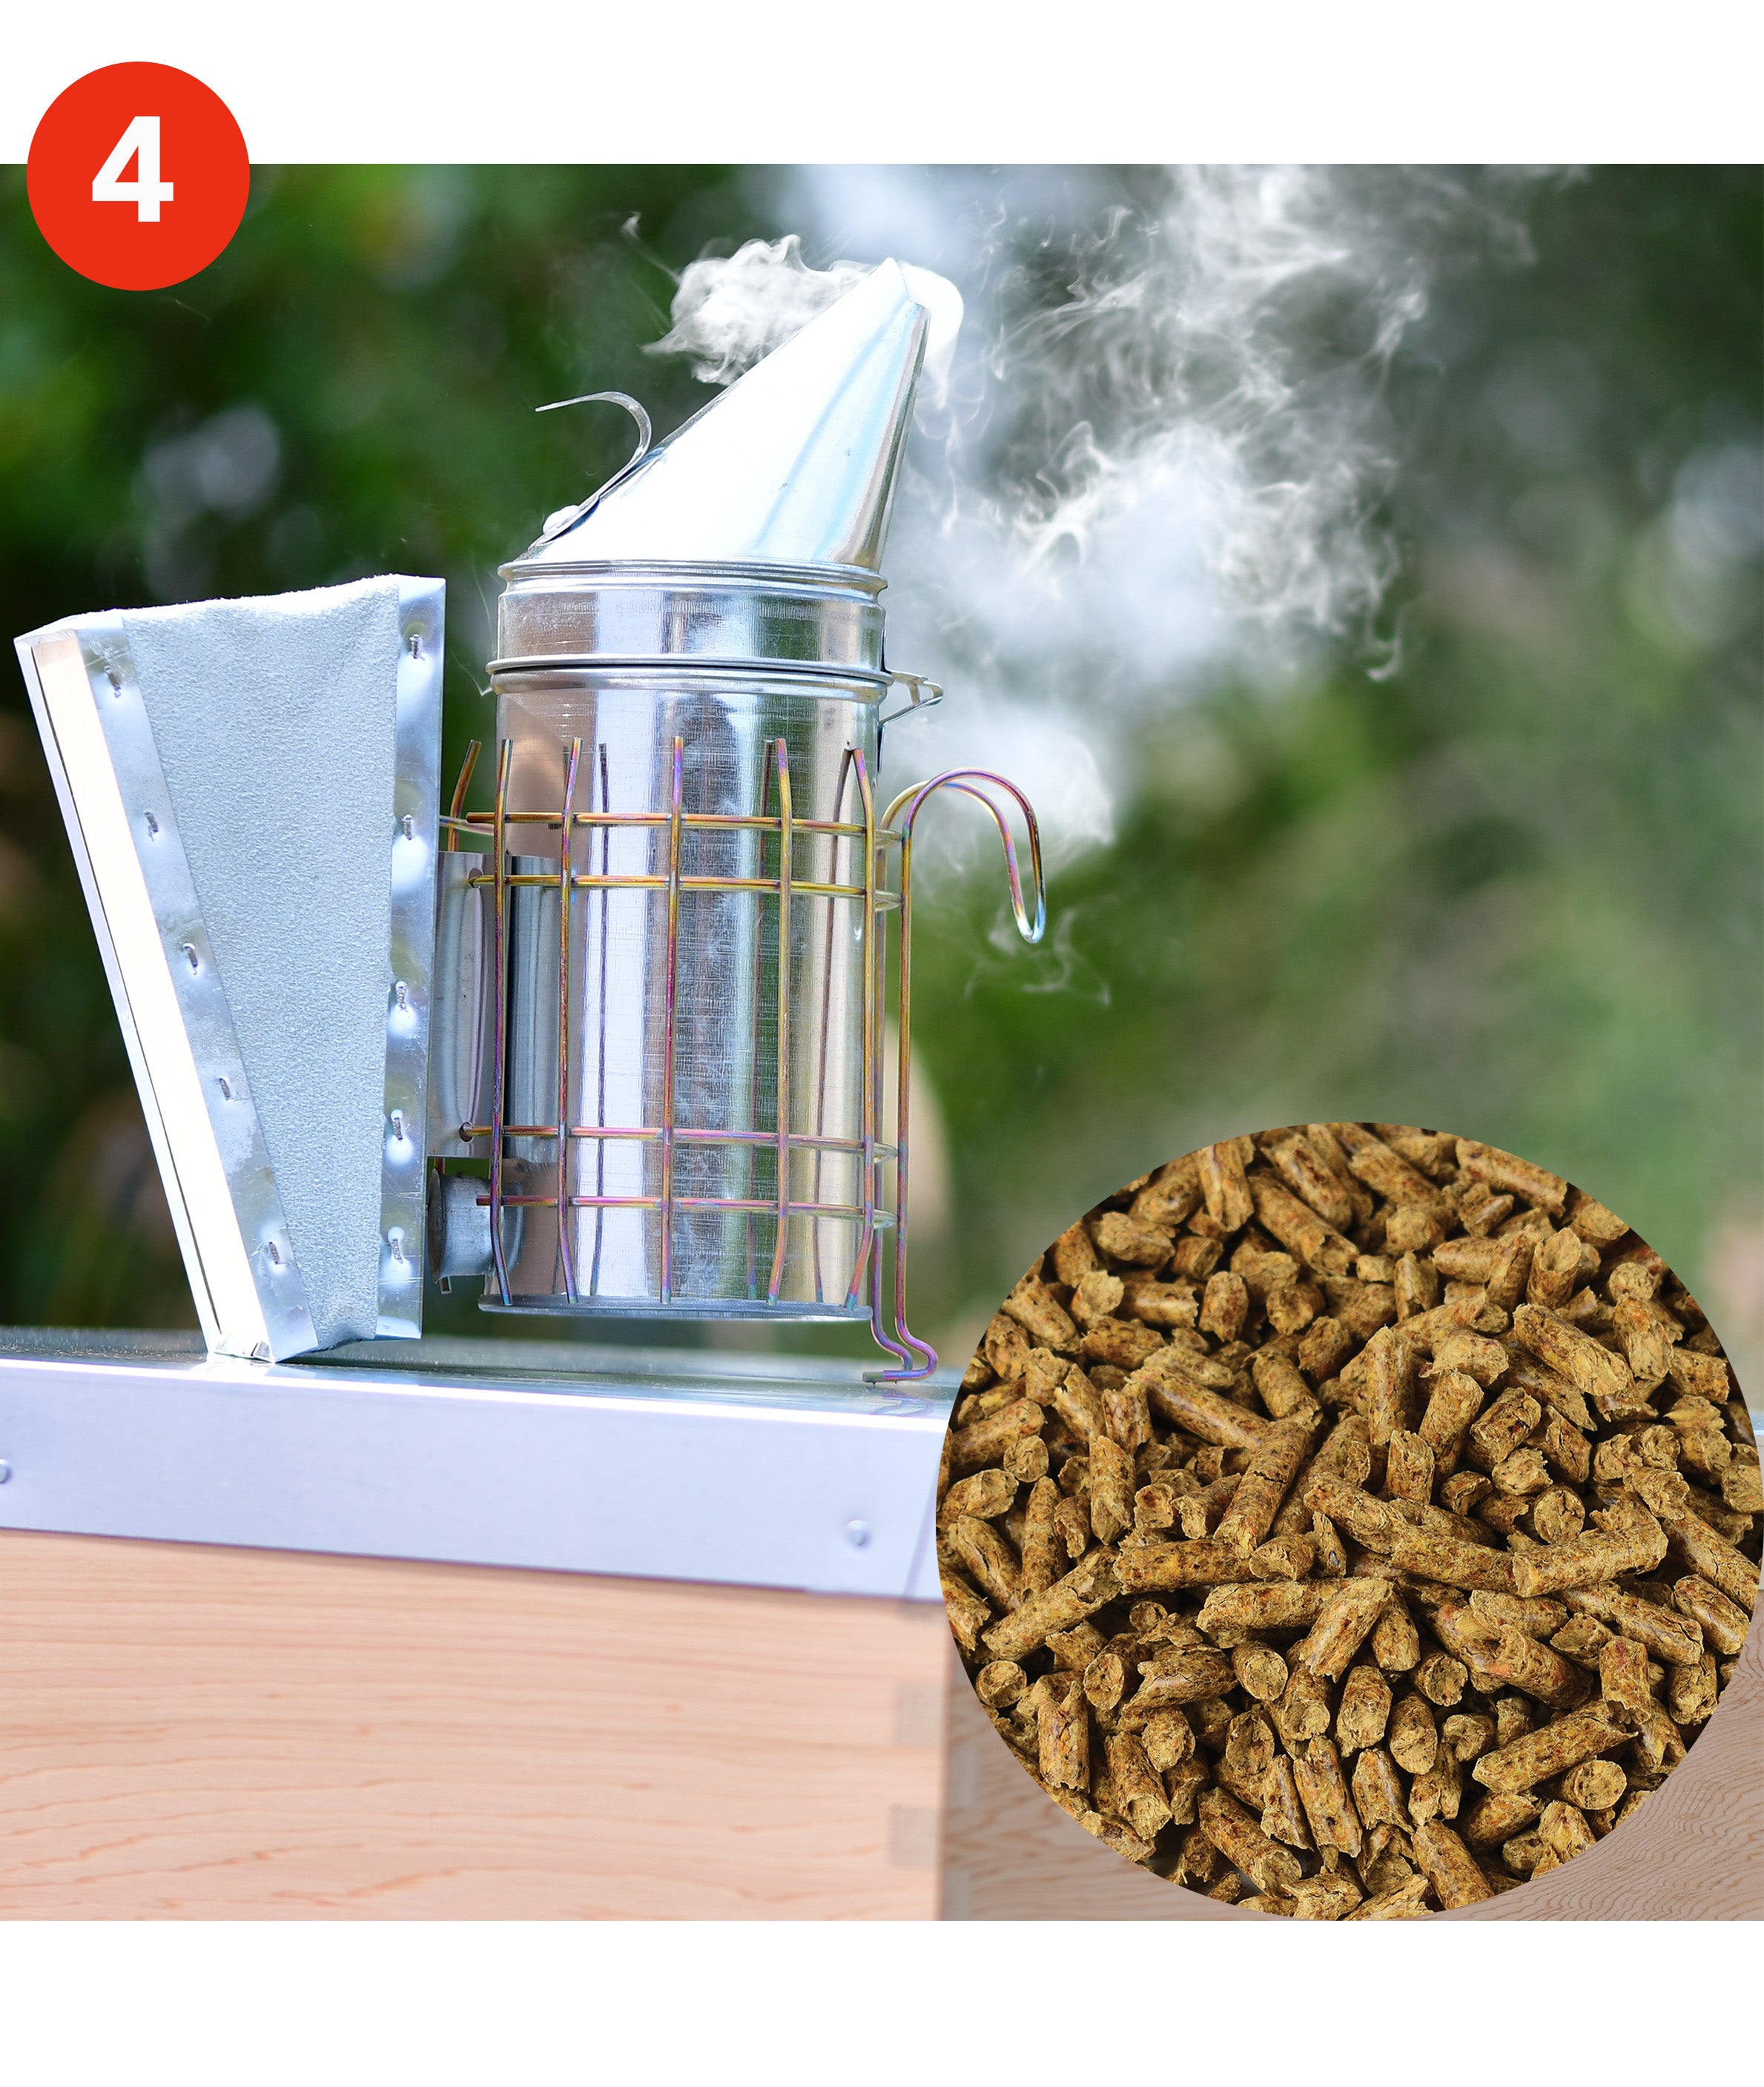 bee smoker and pellets